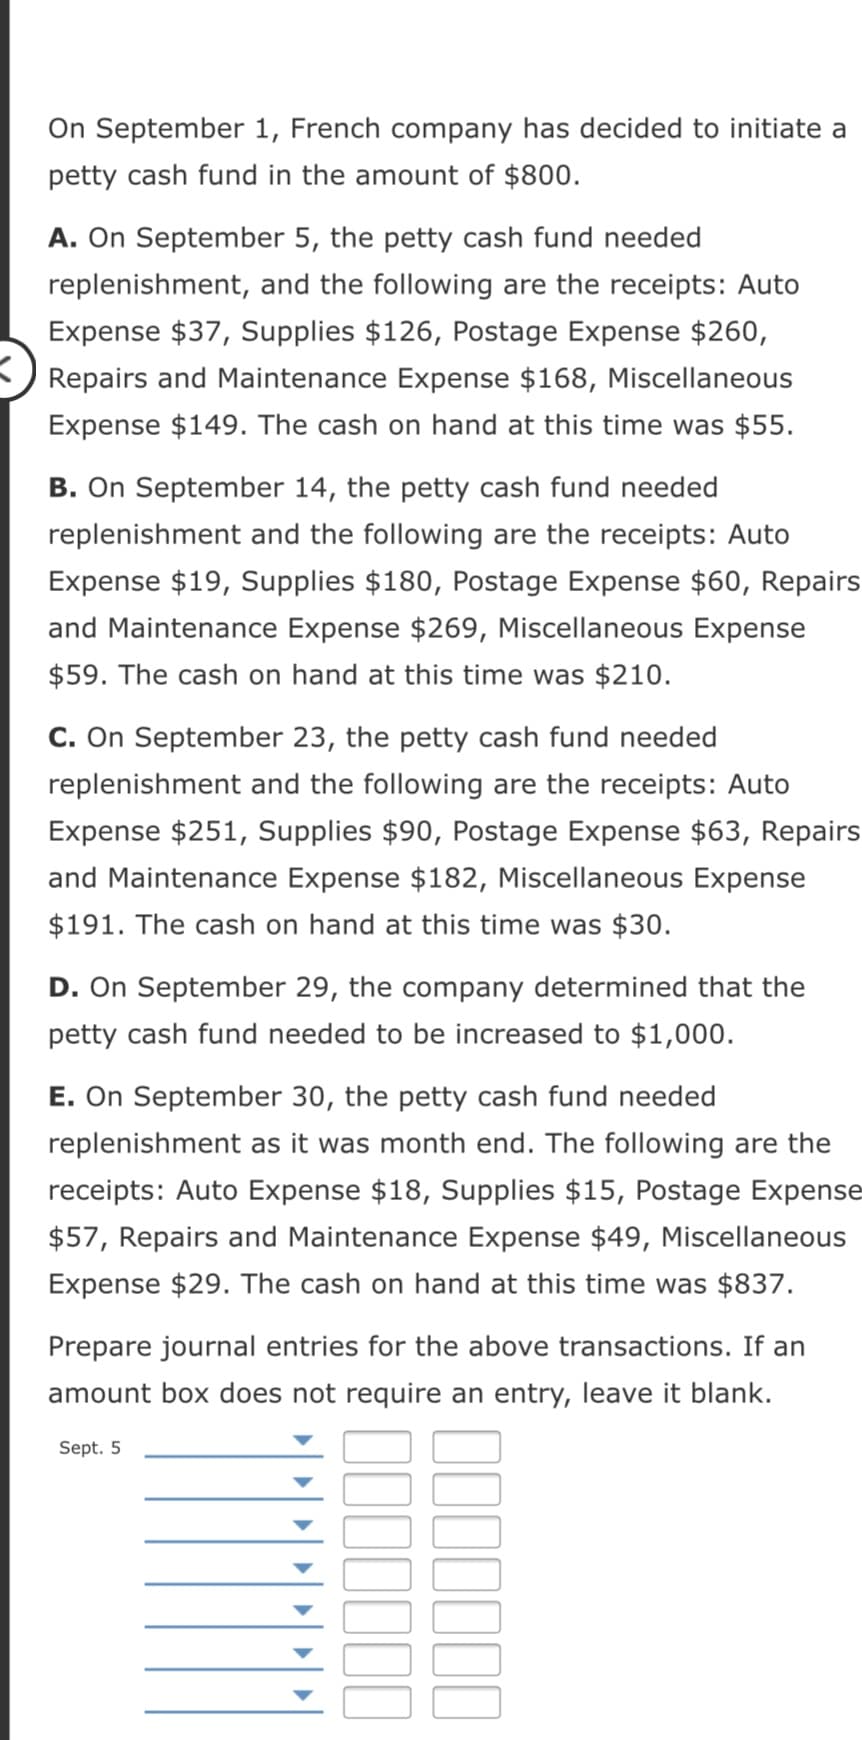 On September 1, French company has decided to initiate a
petty cash fund in the amount of $800.
A. On September 5, the petty cash fund needed
replenishment, and the following are the receipts: Auto
Expense $37, Supplies $126, Postage Expense $260,
Repairs and Maintenance Expense $168, Miscellaneous
Expense $149. The cash on hand at this time was $55.
B. On September 14, the petty cash fund needed
replenishment and the following are the receipts: Auto
Expense $19, Supplies $180, Postage Expense $60, Repairs
and Maintenance Expense $269, Miscellaneous Expense
$59. The cash on hand at this time was $210.
C. On September 23, the petty cash fund needed
replenishment and the following are the receipts: Auto
Expense $251, Supplies $90, Postage Expense $63, Repairs
and Maintenance Expense $182, Miscellaneous Expense
$191. The cash on hand at this time was $30.
D. On September 29, the company determined that the
petty cash fund needed to be increased to $1,000.
E. On September 30, the petty cash fund needed
replenishment as it was month end. The following are the
receipts: Auto Expense $18, Supplies $15, Postage Expense
$57, Repairs and Maintenance Expense $49, Miscellaneous
Expense $29. The cash on hand at this time was $837.
Prepare journal entries for the above transactions. If an
amount box does not require an entry, leave it blank.
Sept. 5
